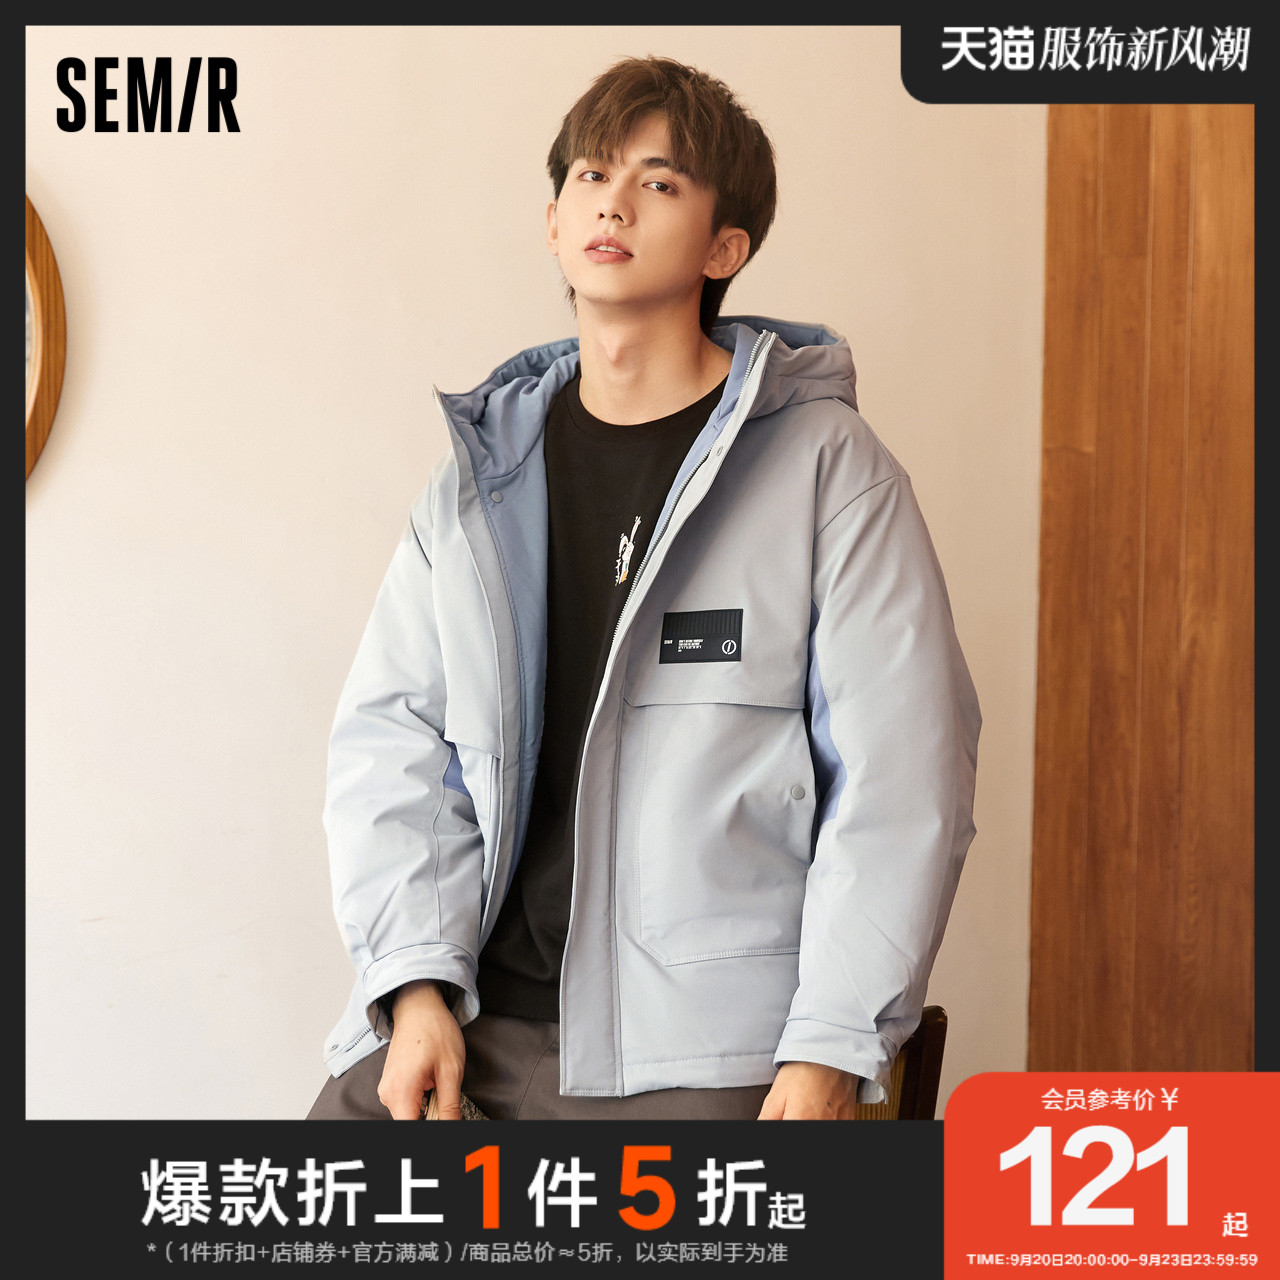 Senma's off-season clearance down jacket men's winter fashion contrast color patchwork loose hooded insulation mid length jacket trend